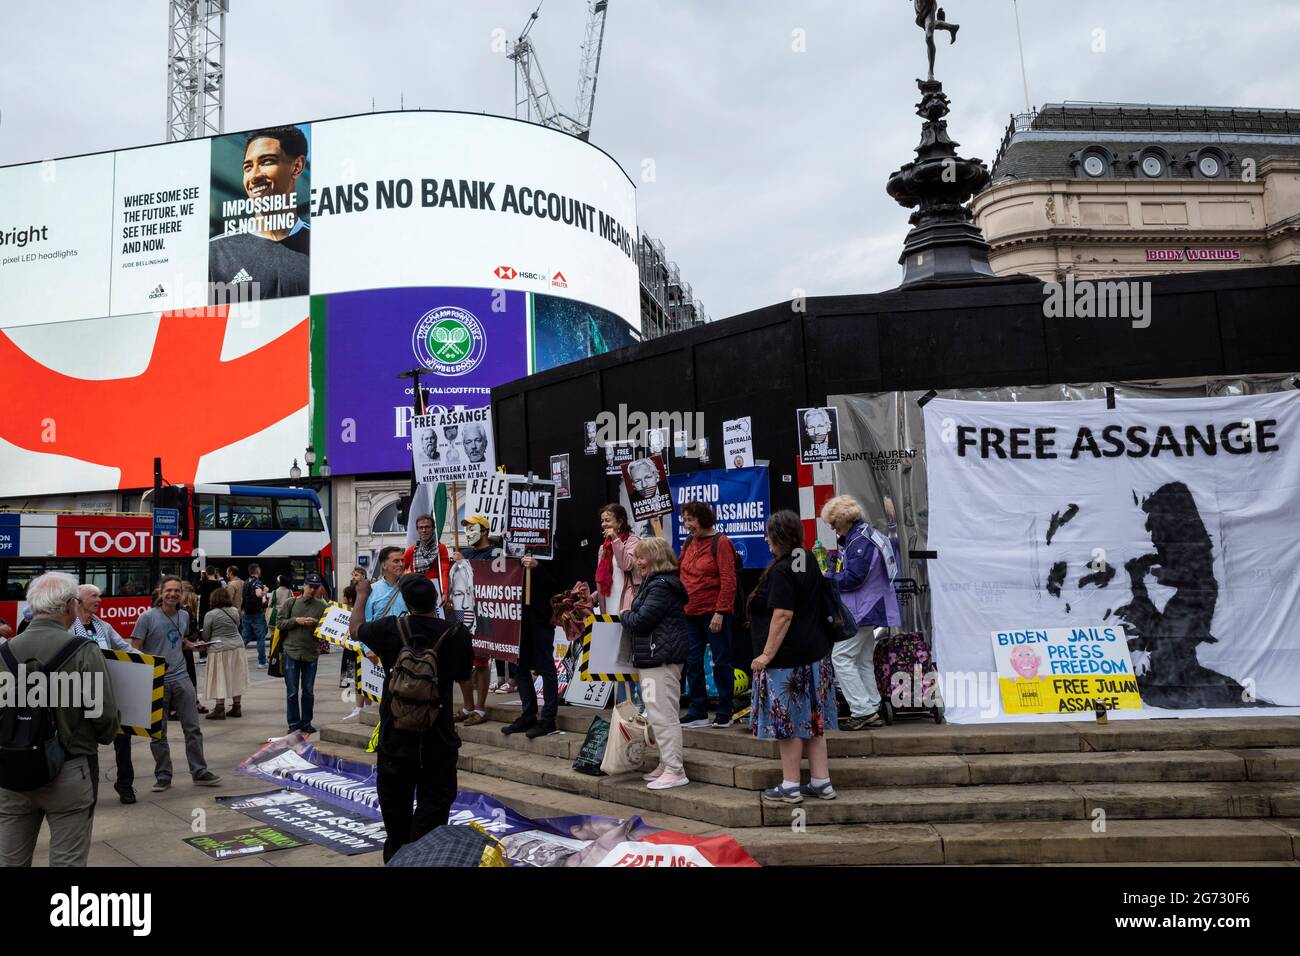 London, UK.  10 July 2021.  Supporters of Julian Assange in Piccadilly Circus at a protest demanding his release.   Wikileaks founder Assange is currently held in Belmarsh prison.  The statue of Eros is currently boarded up ahead of the final of Euro 2020 between Italy and England tomorrow night Wembley Stadium.  Credit: Stephen Chung / Alamy Live News Stock Photo